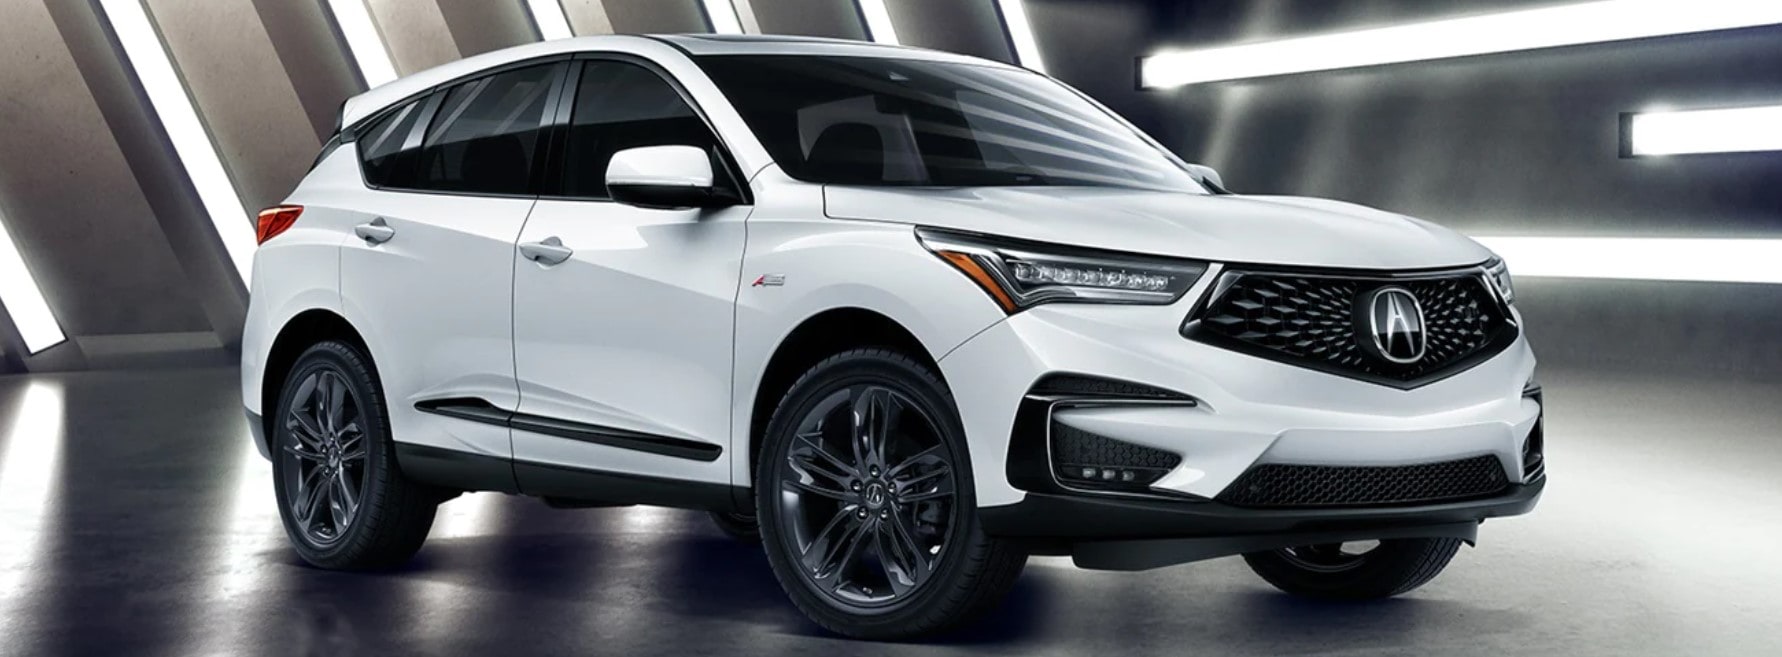 2022 Acura RDX Model Review in Dallas, TX at Goodson Acura